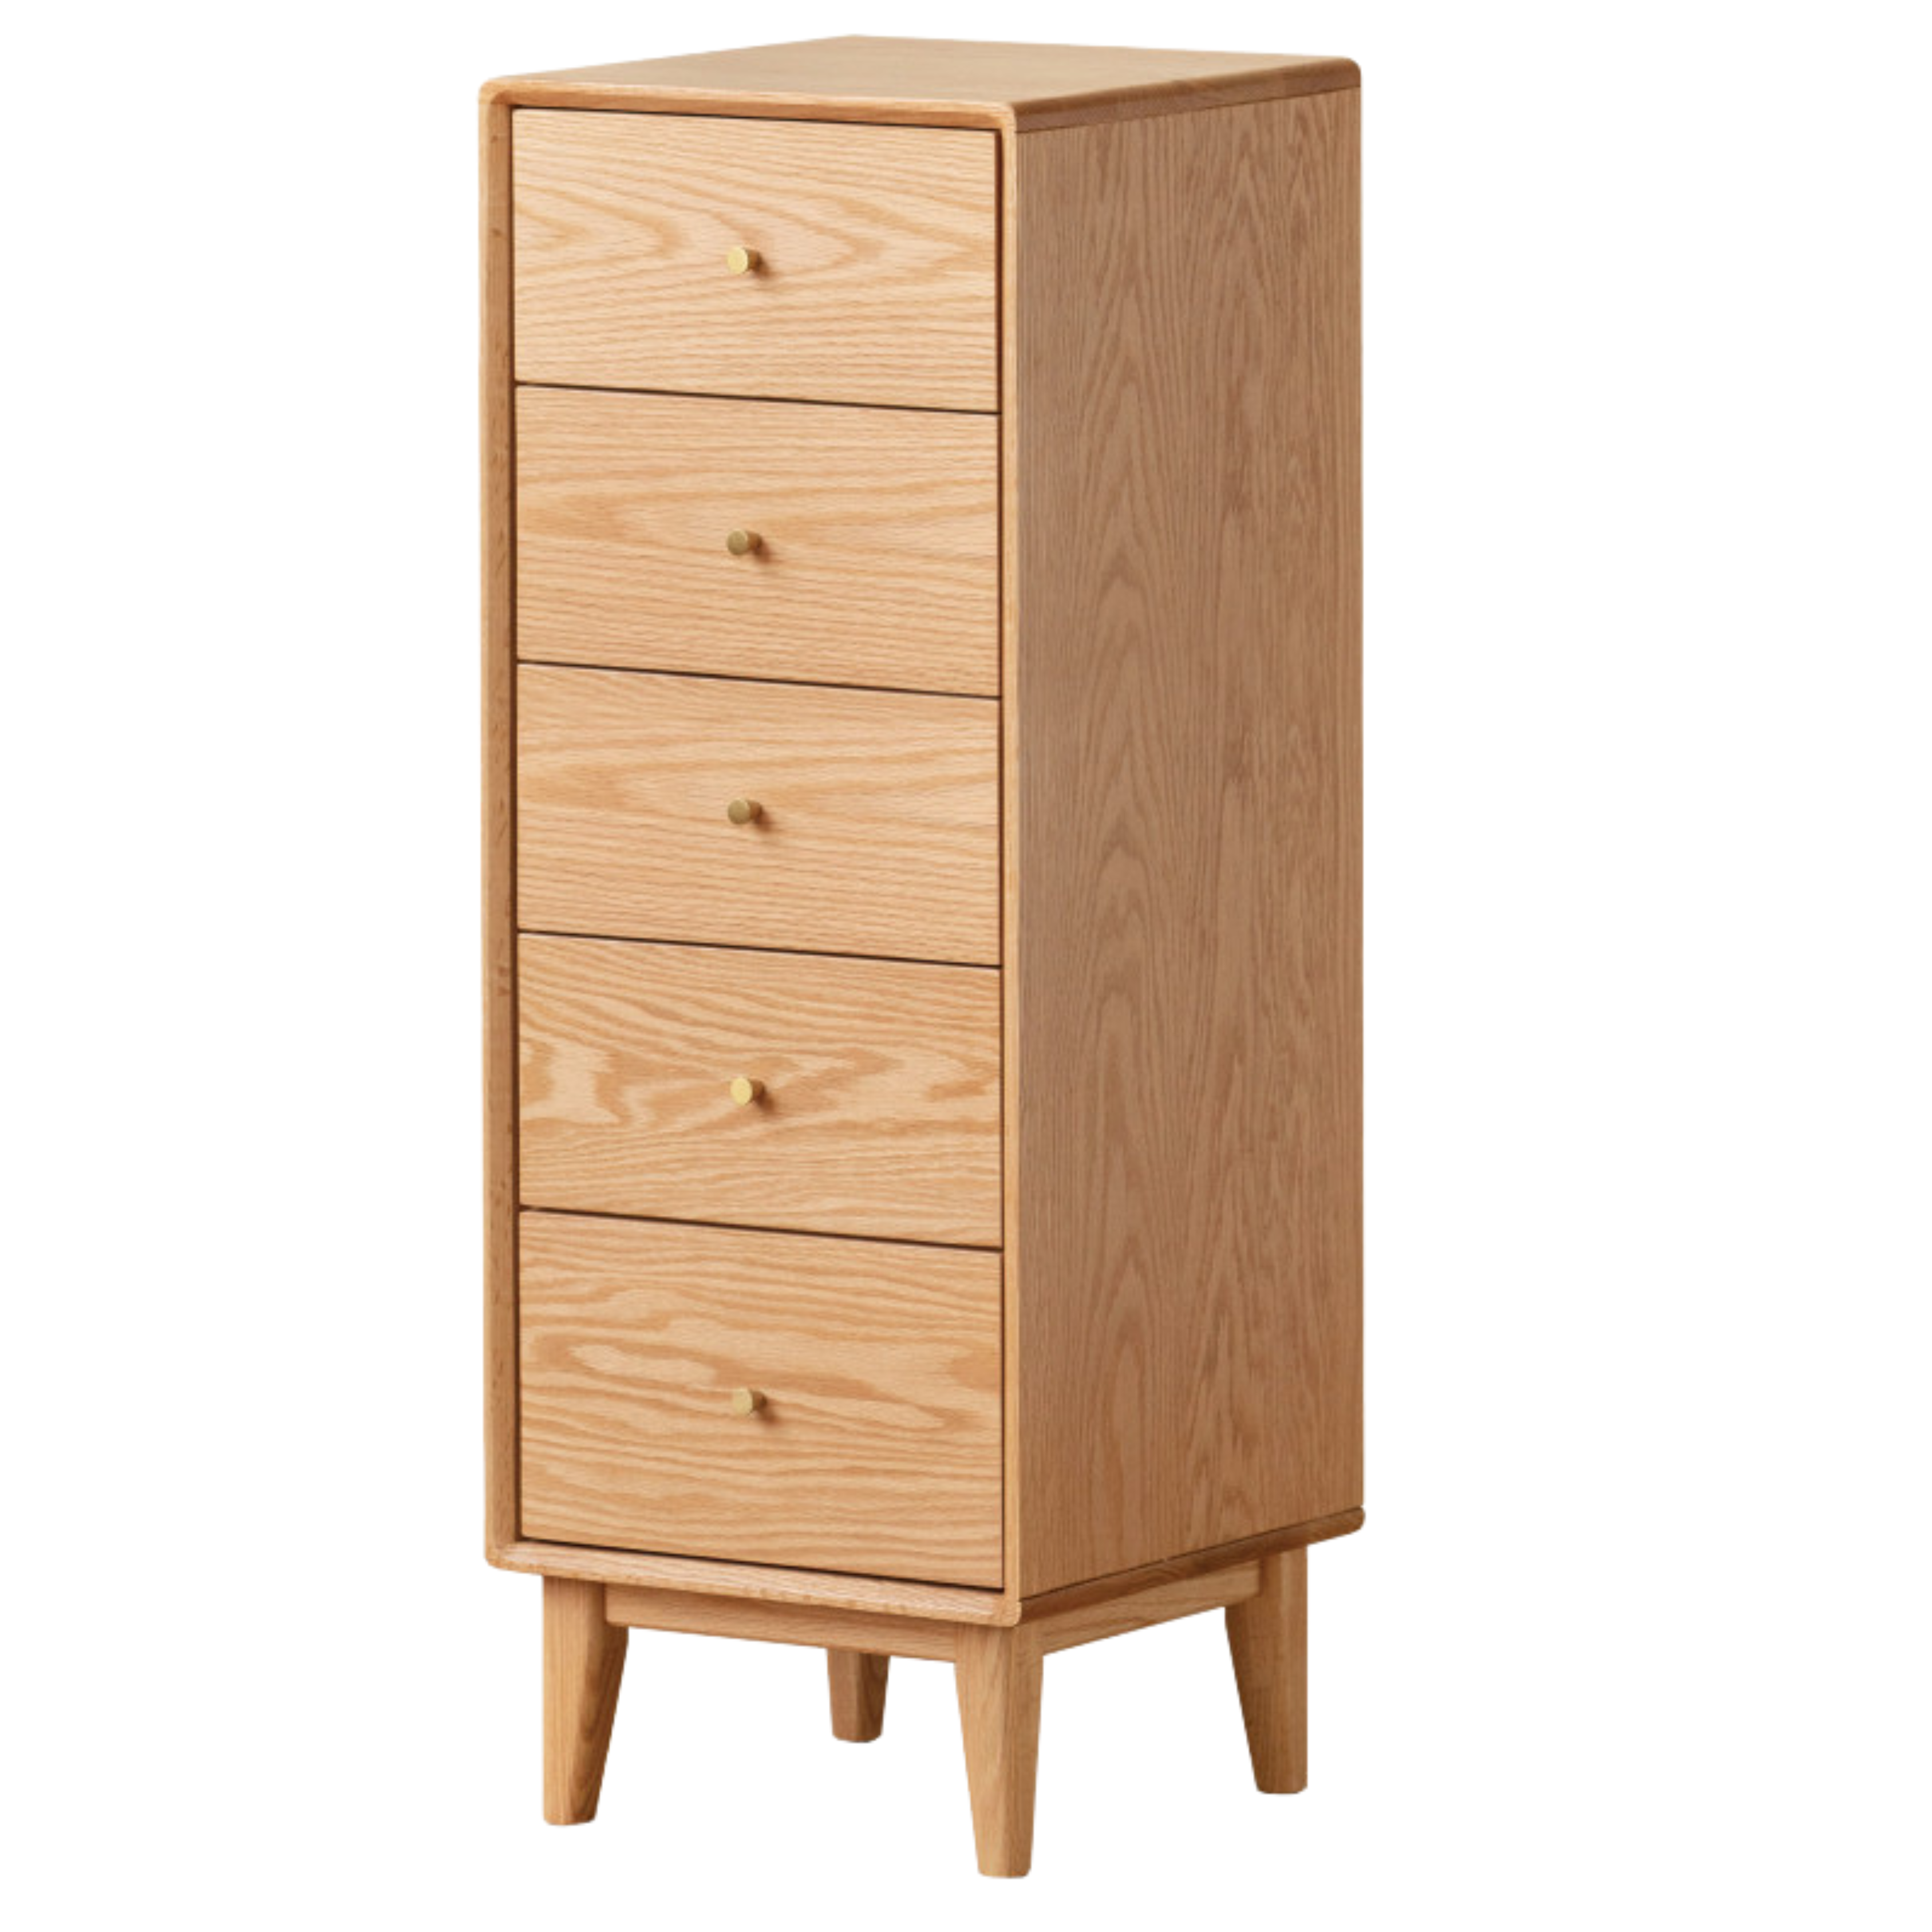 Oak solid wood Chest of drawers ,multi-functional storage cabinet combination